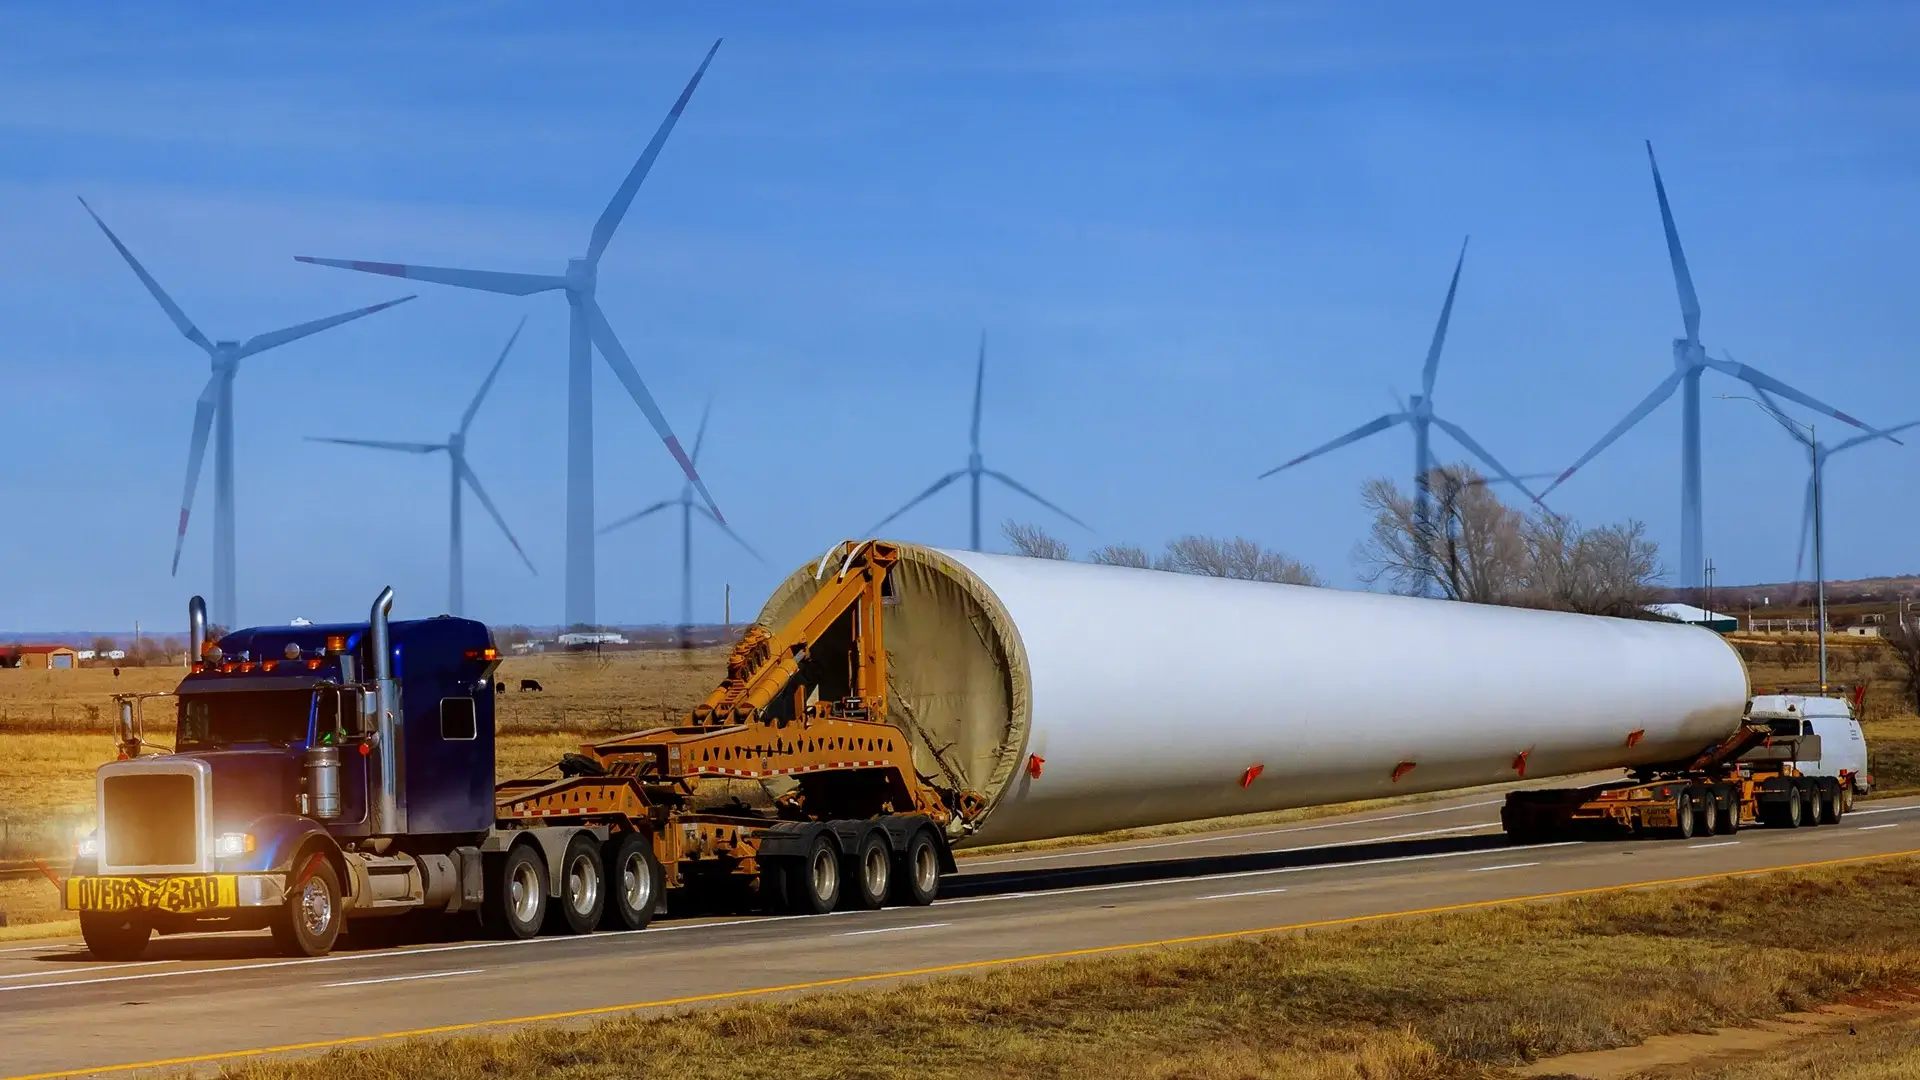 CakeBoxx Leads in Standardization for Wind Energy